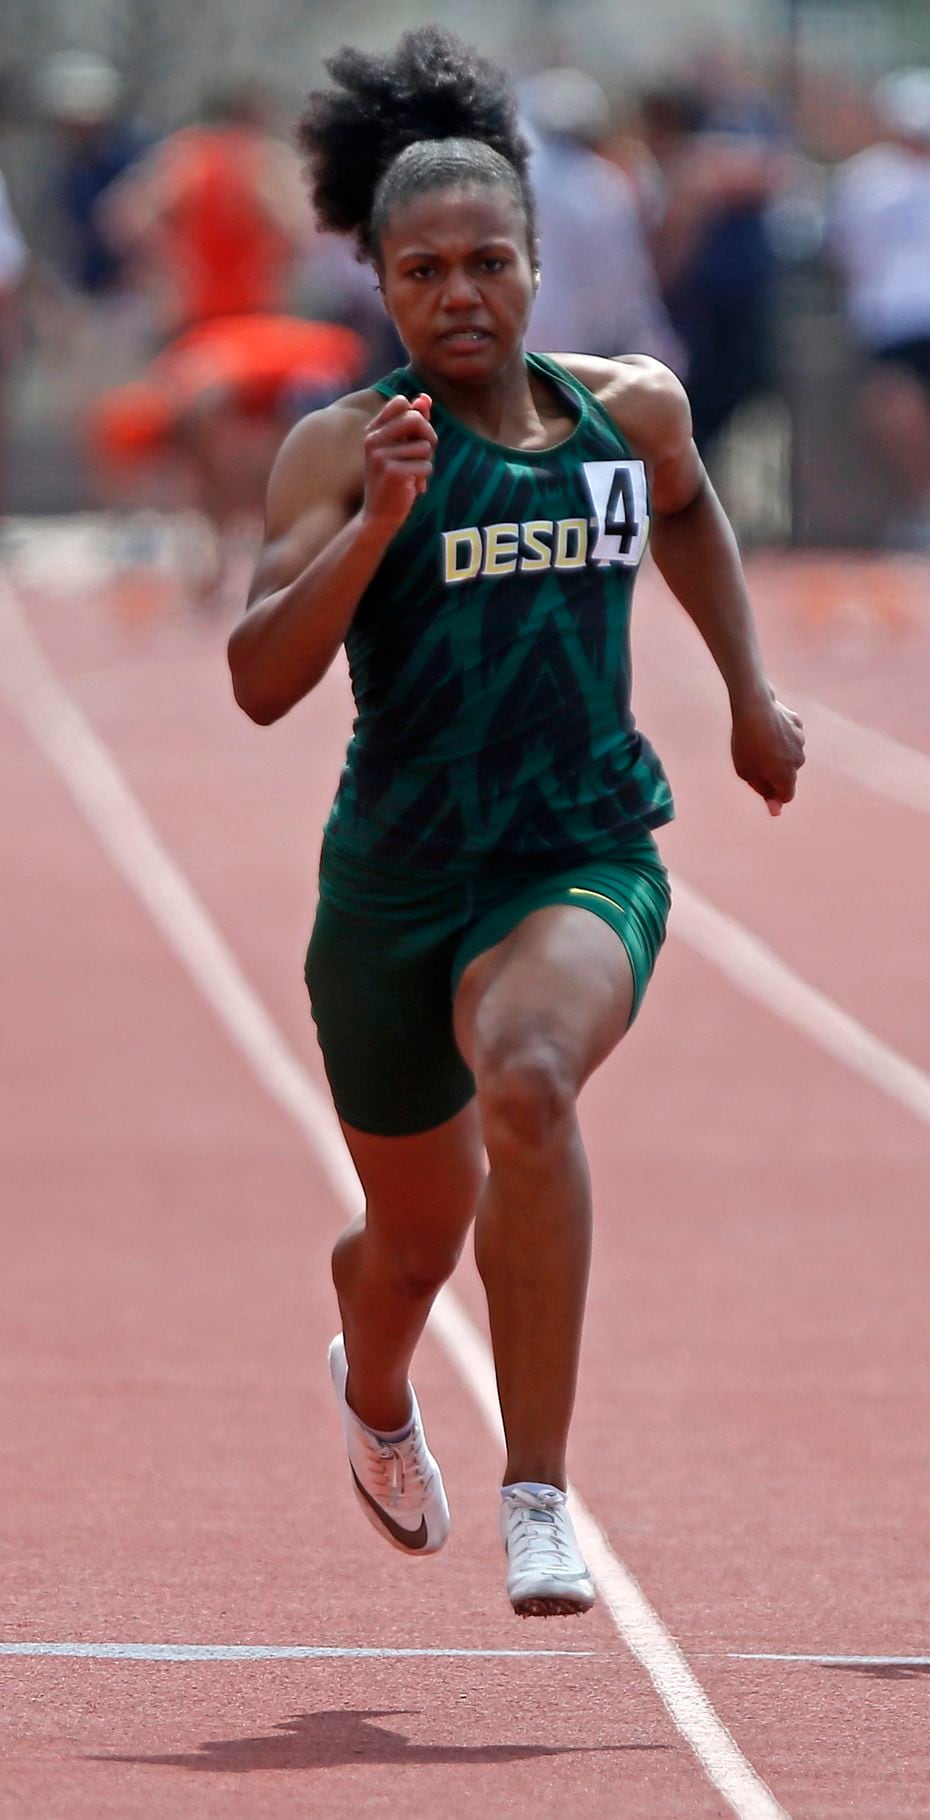 Jaera Griffin  18, of DeSotto High School, had the best time in the girls 100 meters during the Jesuit-Sheaner Relays held at Jesuit College Preparatory School in Dallas on Saturday, March 27, 2021. 